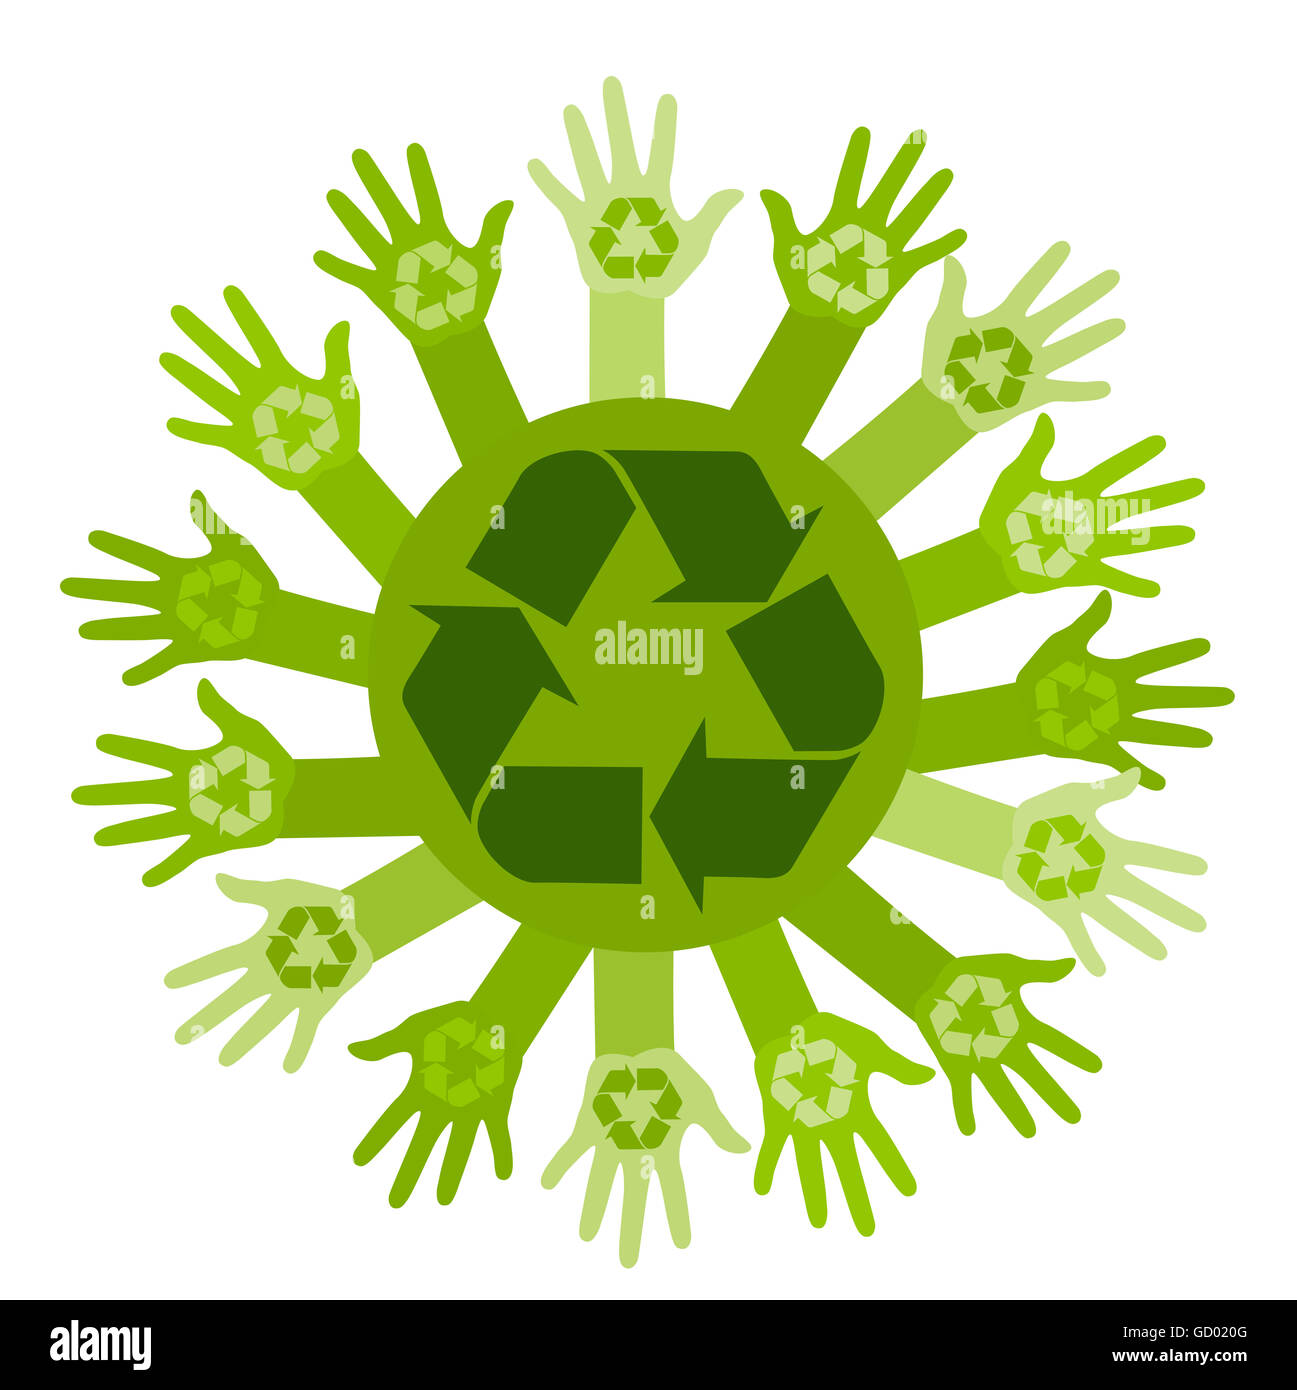 Conceptual ecology illustration with hands and recycling sign Stock Photo